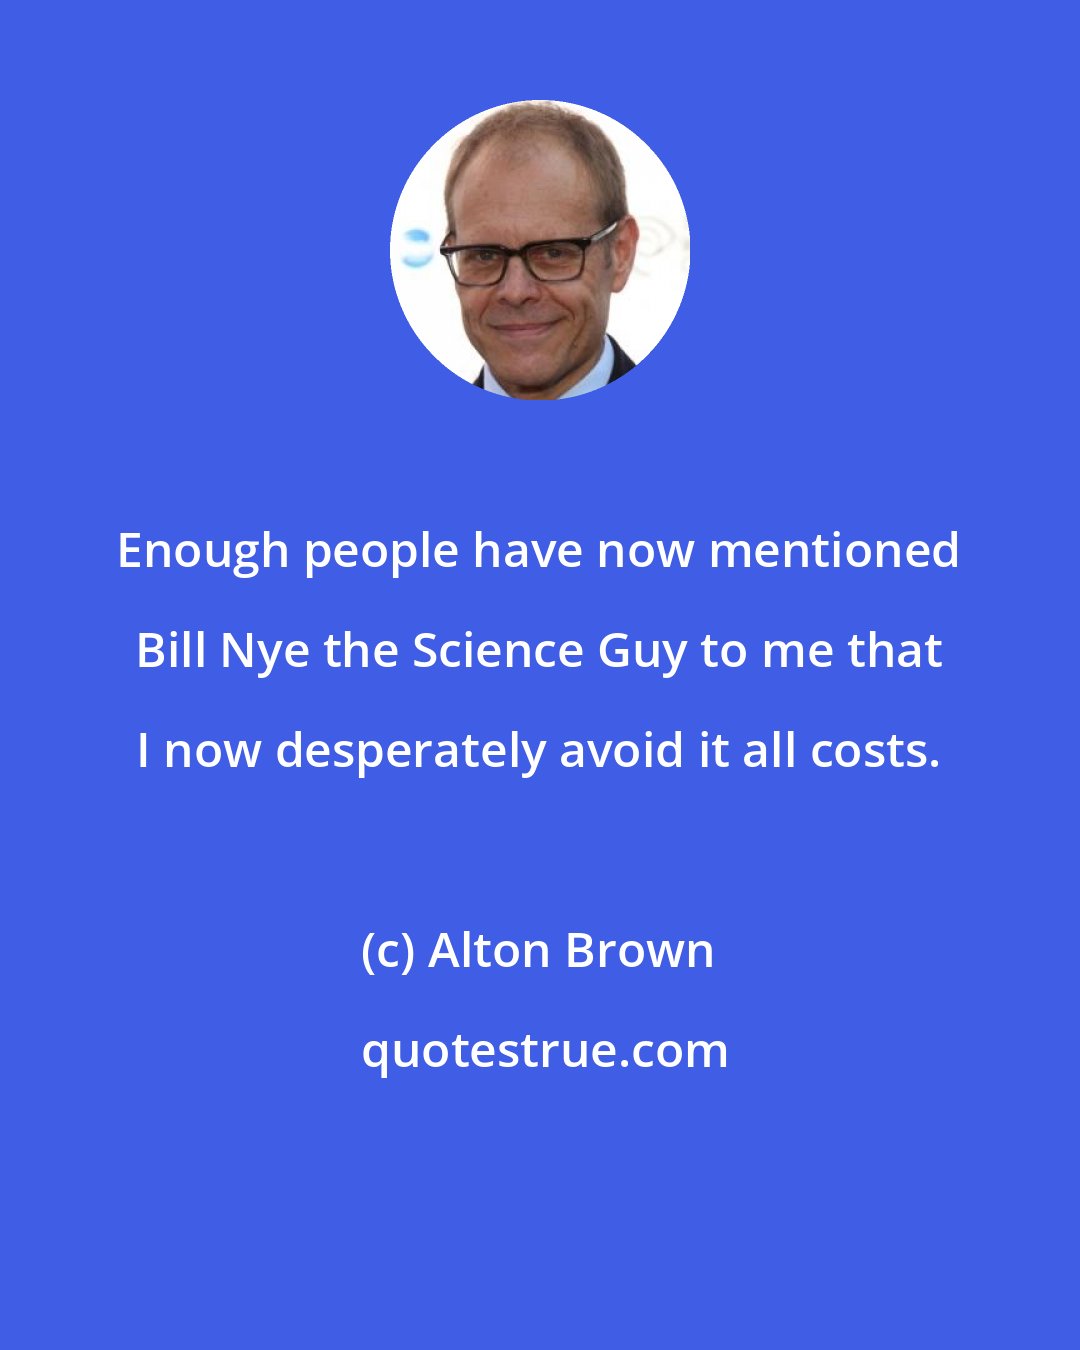 Alton Brown: Enough people have now mentioned Bill Nye the Science Guy to me that I now desperately avoid it all costs.